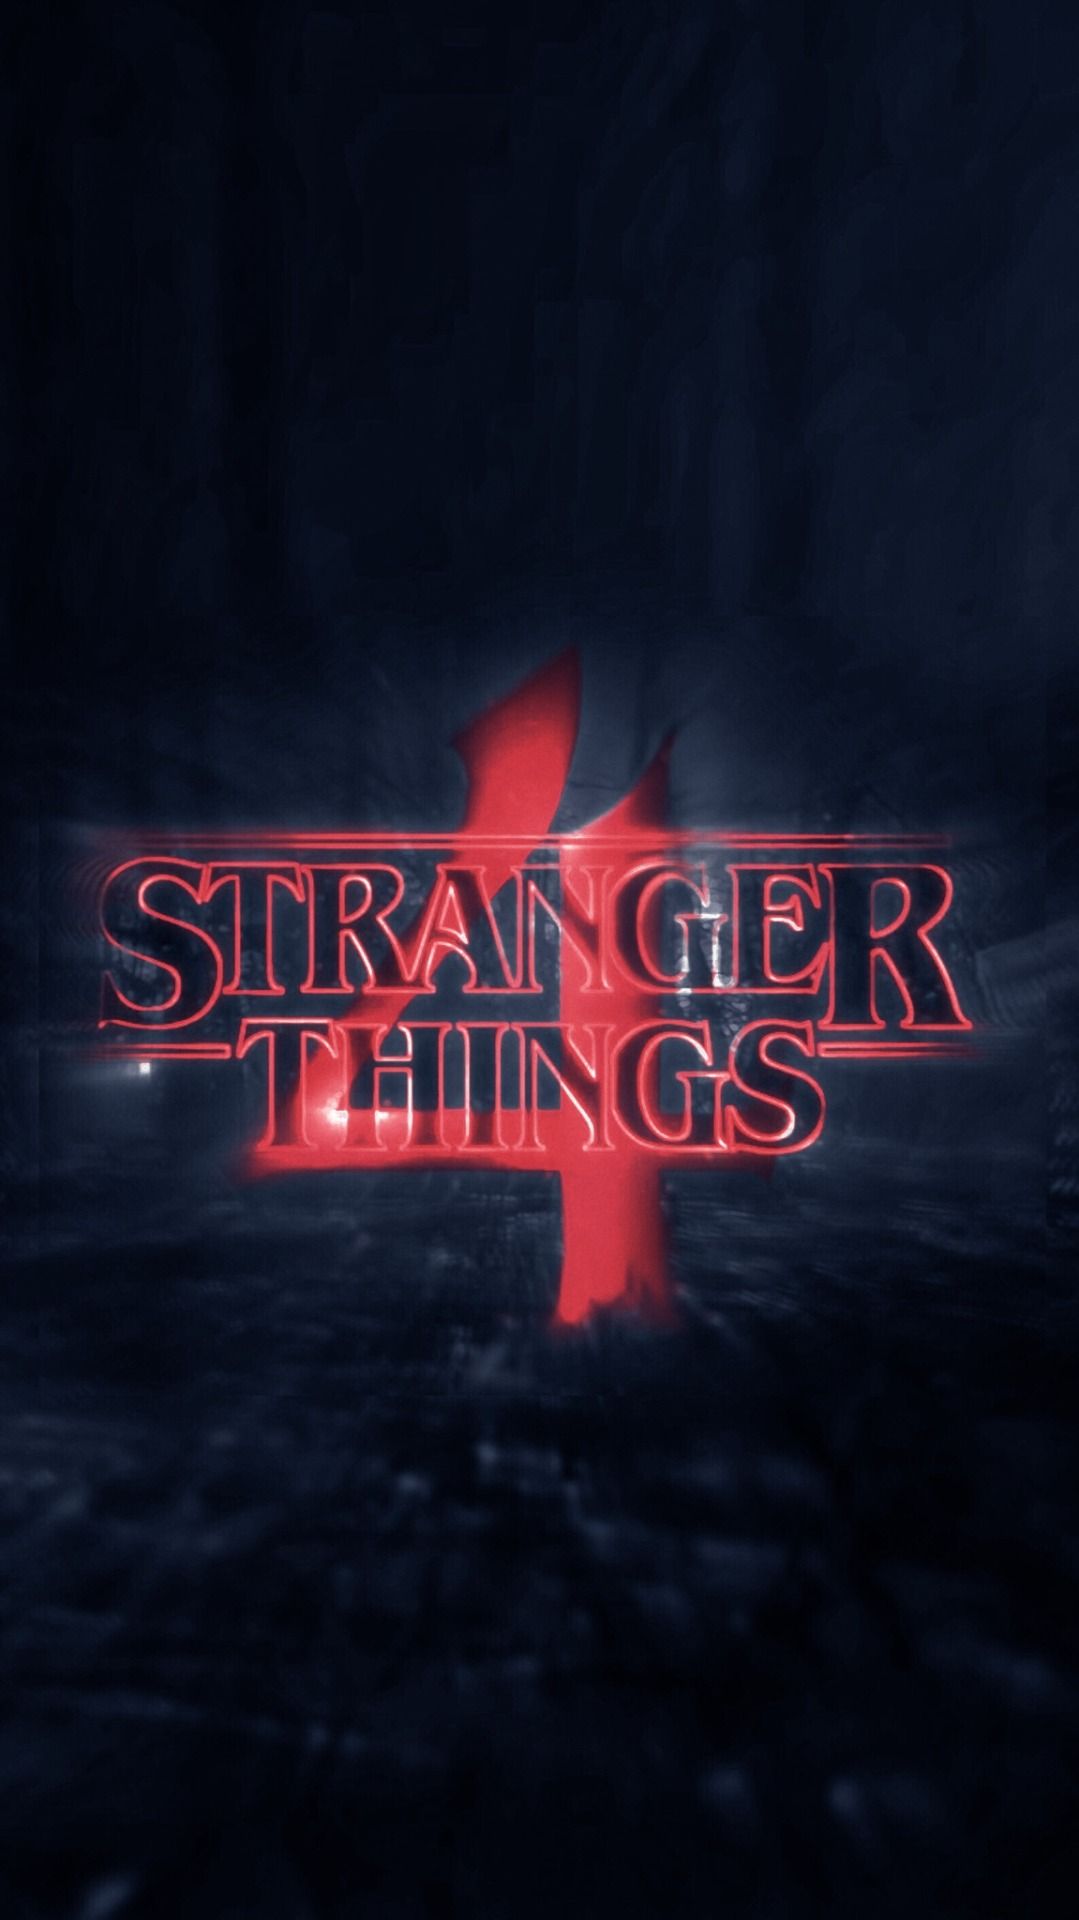 190 Stranger things wallpapers ideas